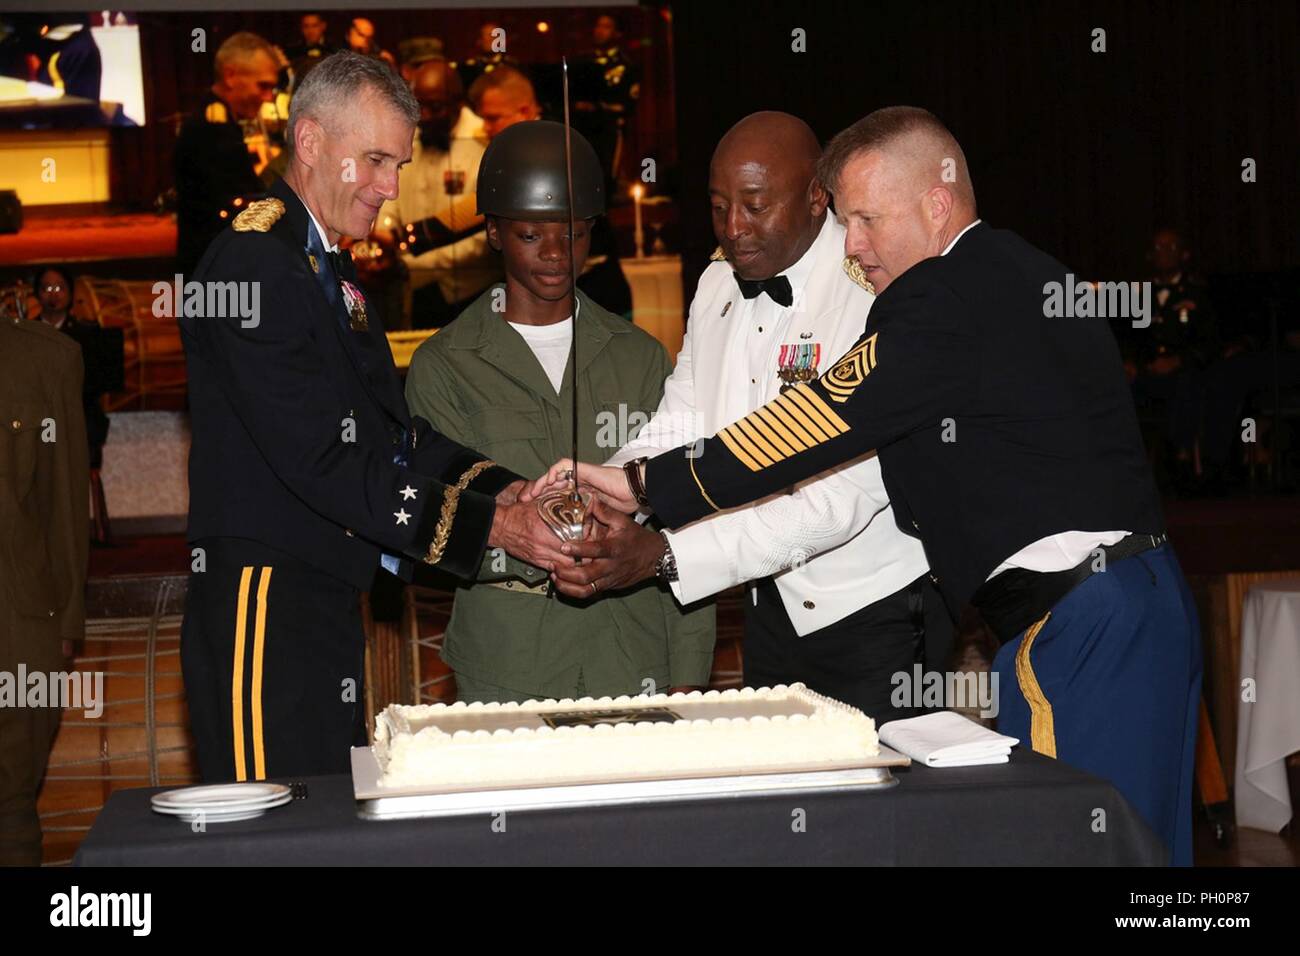 Pfc. Cynarra Strickland, assigned to 35th Combat Sustainment Support Battalion, participates in the cake-cutting ceremony during the ball for 243rd Army Birthday held at Camp Zama Community Club June 14, 2018 along with Maj. Gen. James F. Pasquarette, left, commanding general of U.S. Army Japan, and Command Sgt. Maj. Richard Clark, right, command sergeant major of USARJ. Stock Photo